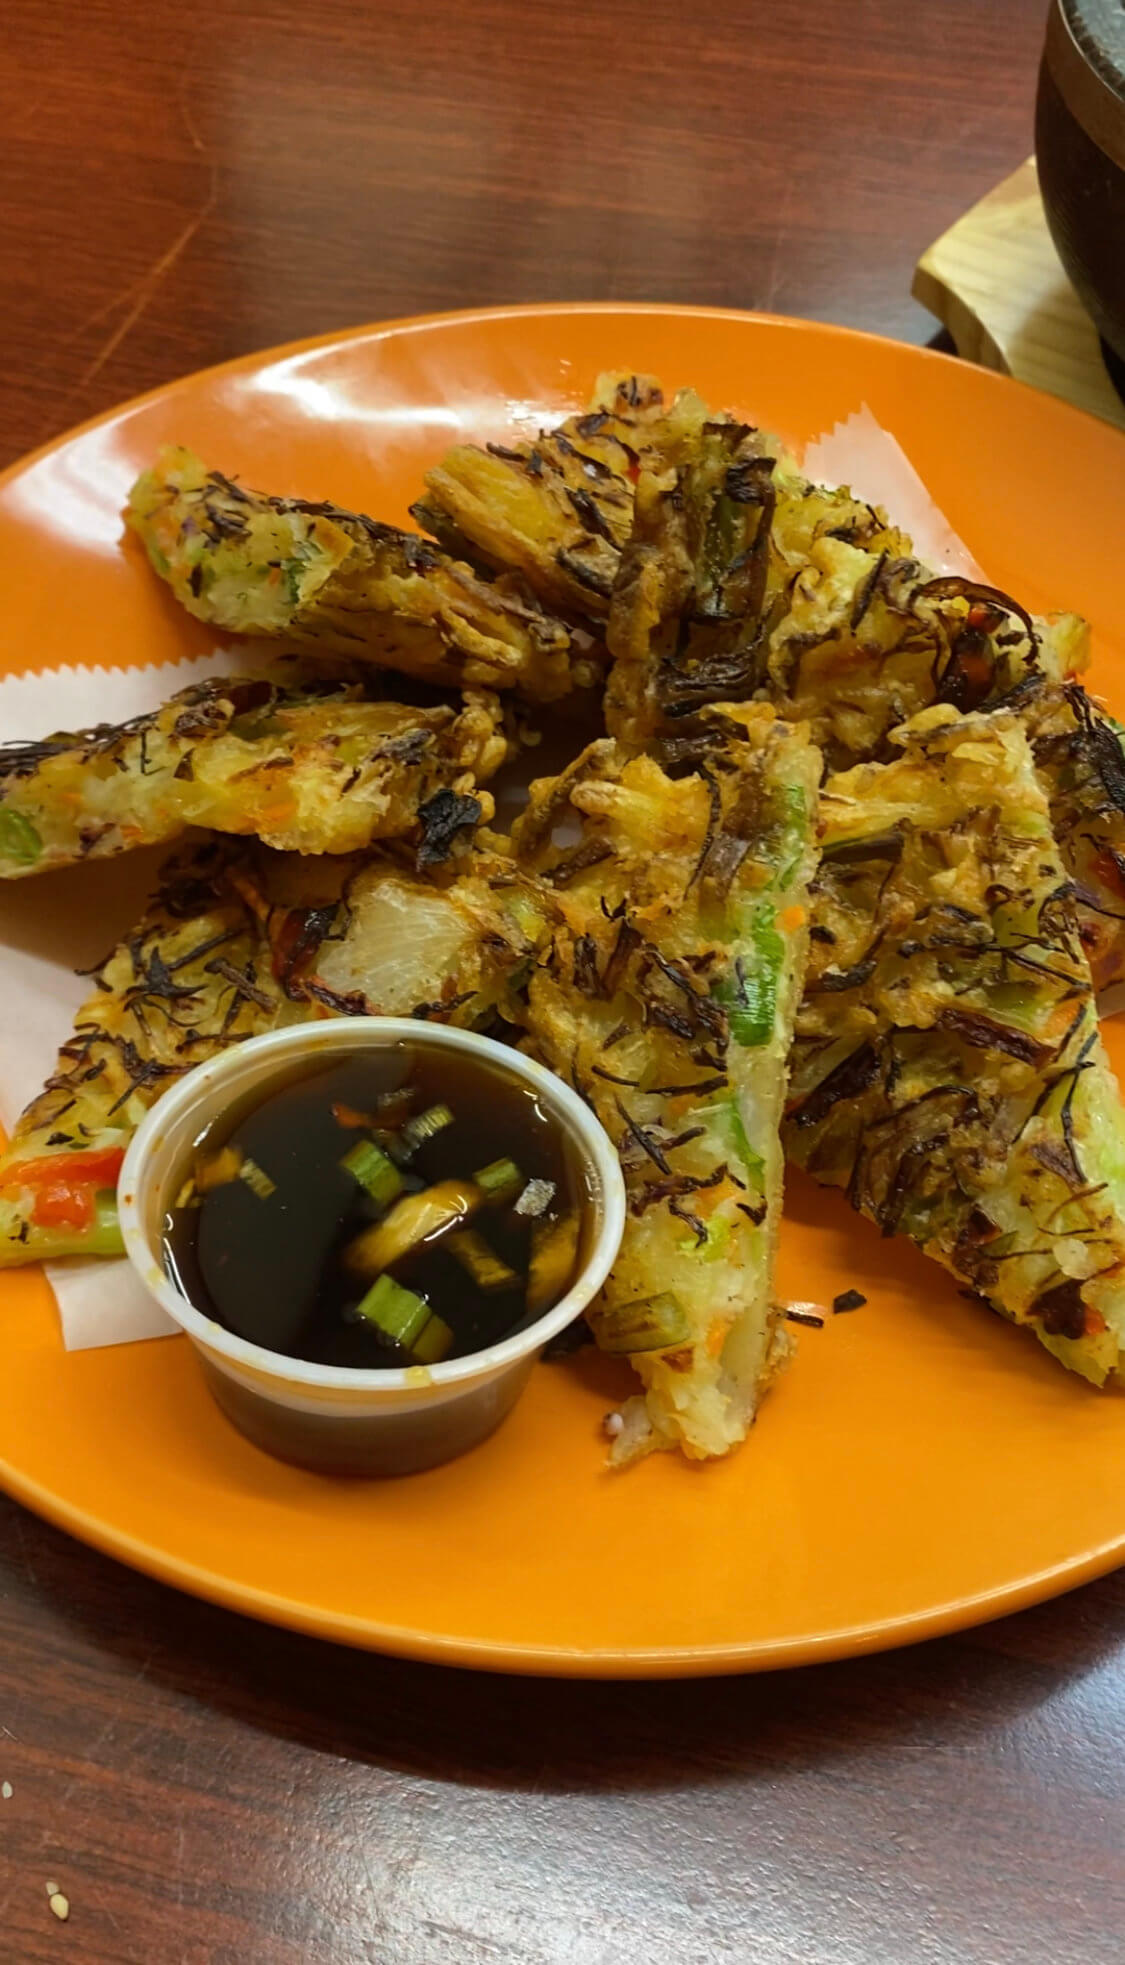 An order of Korean Vegetable Pancakes, Yachaejeon, with a side of soy dipping sauce.